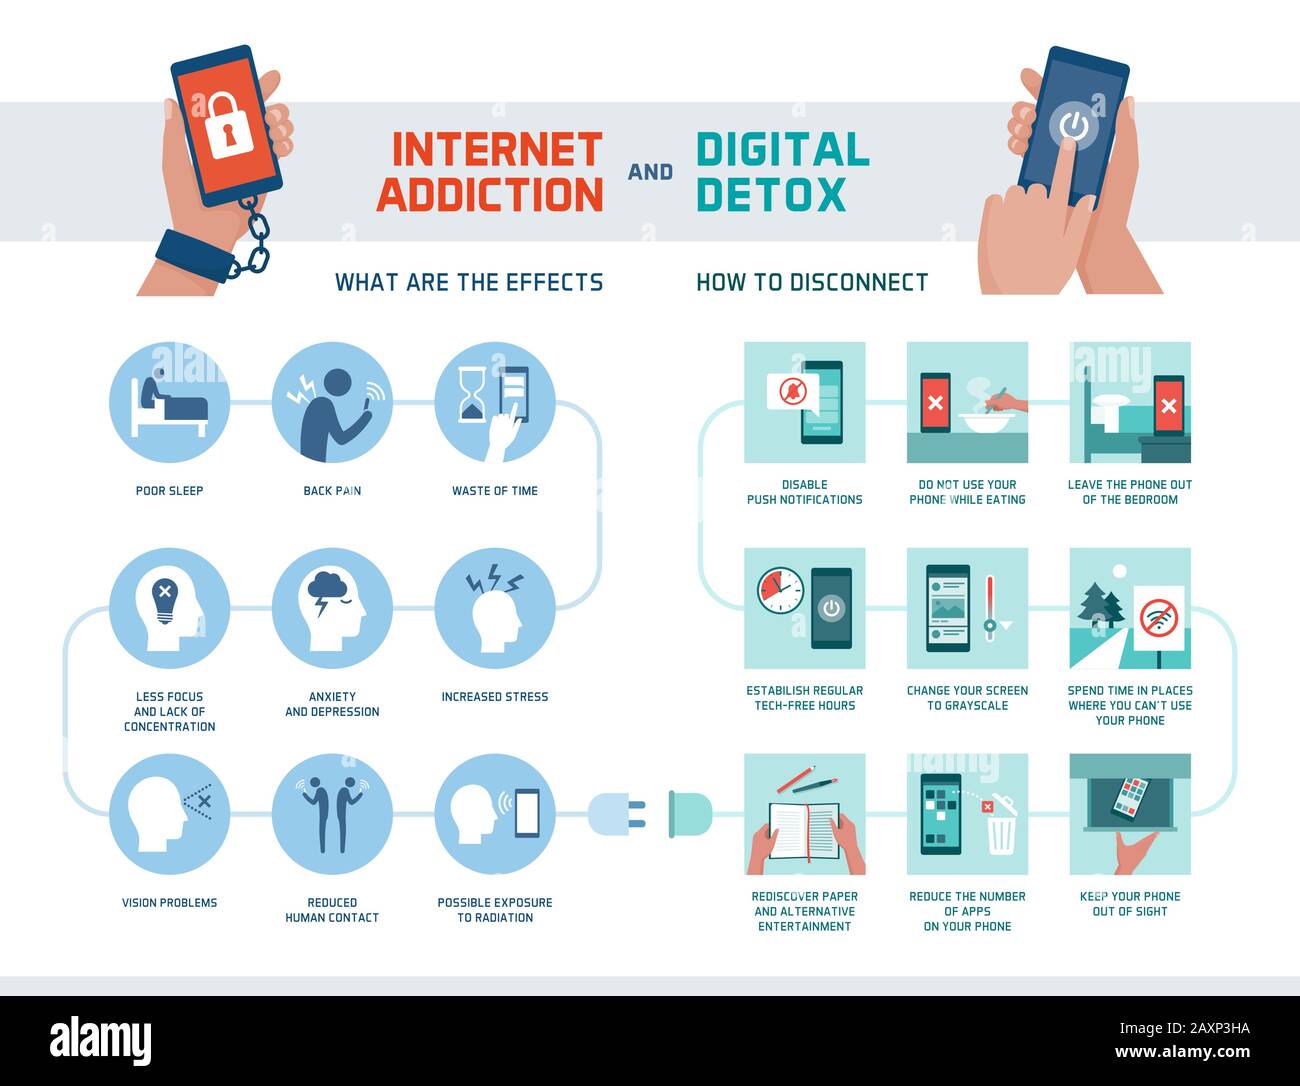 Internet addiction and digital detox infographic: what are the effects on our bodies and how to reduce the time spent on digital devices Stock Vector